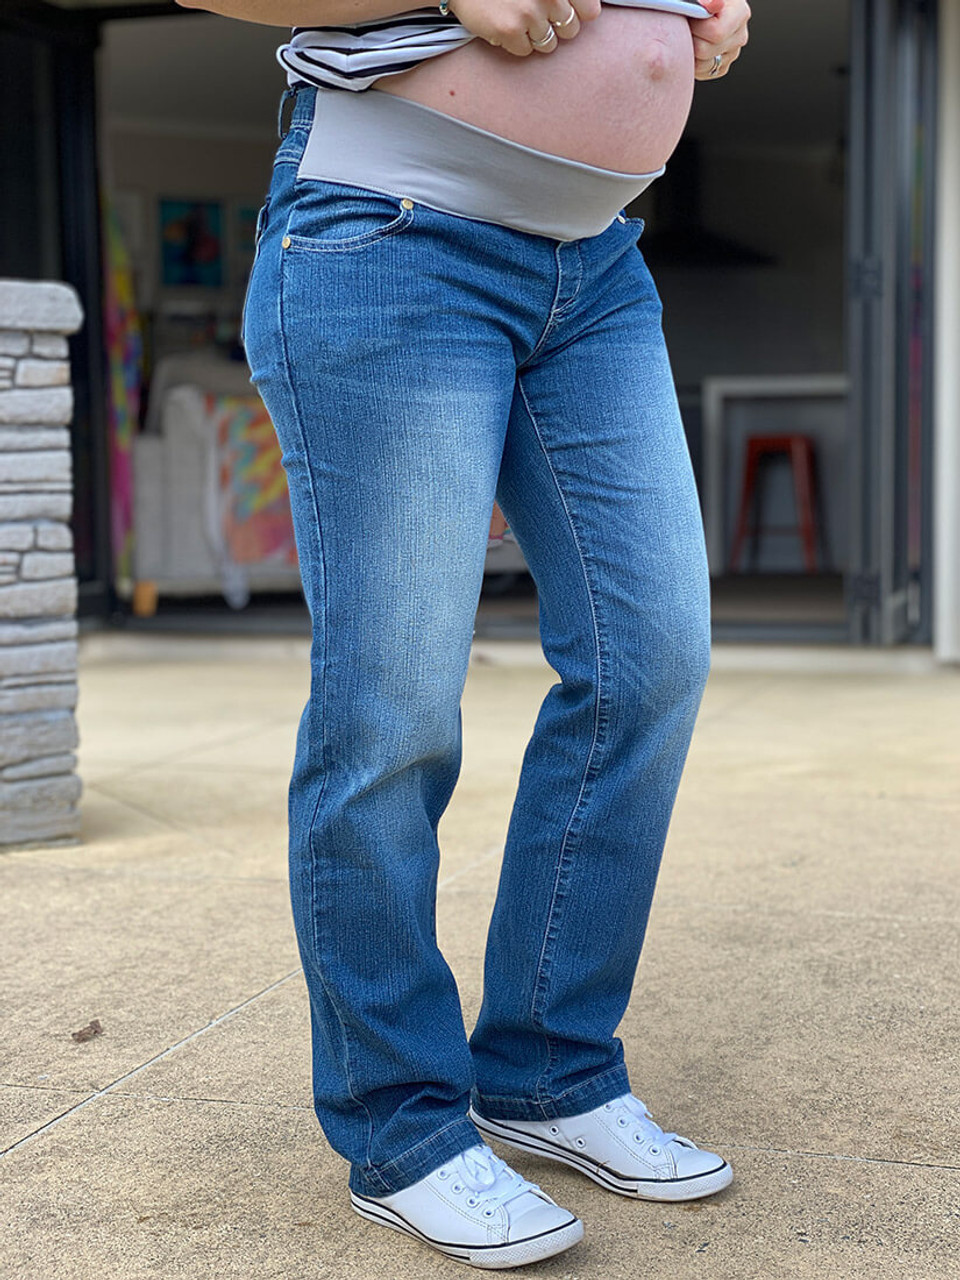 Boyfriend Maternity Jeans - Relaxed Fit - Roll them up for a relaxed look - Maternity Jeans